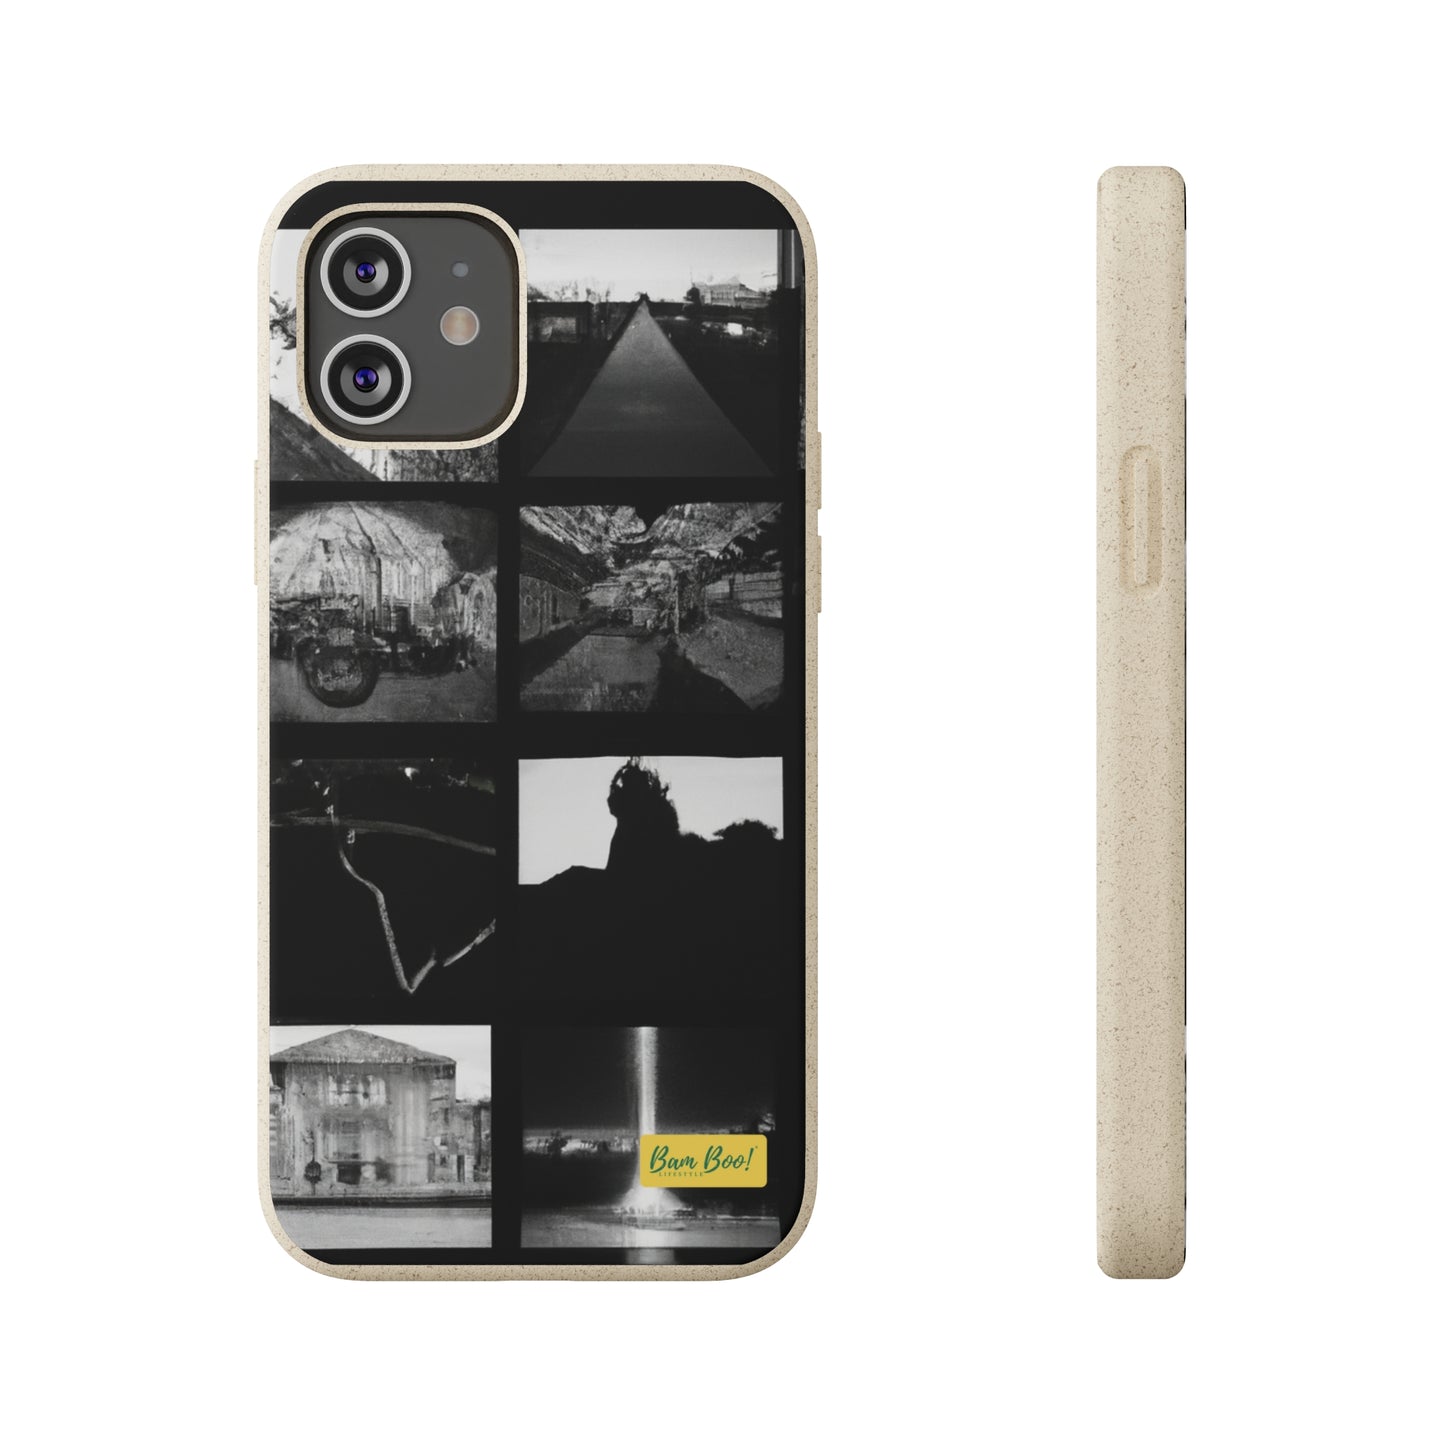 "City of the Soul: An Urban Collage" - Bam Boo! Lifestyle Eco-friendly Cases